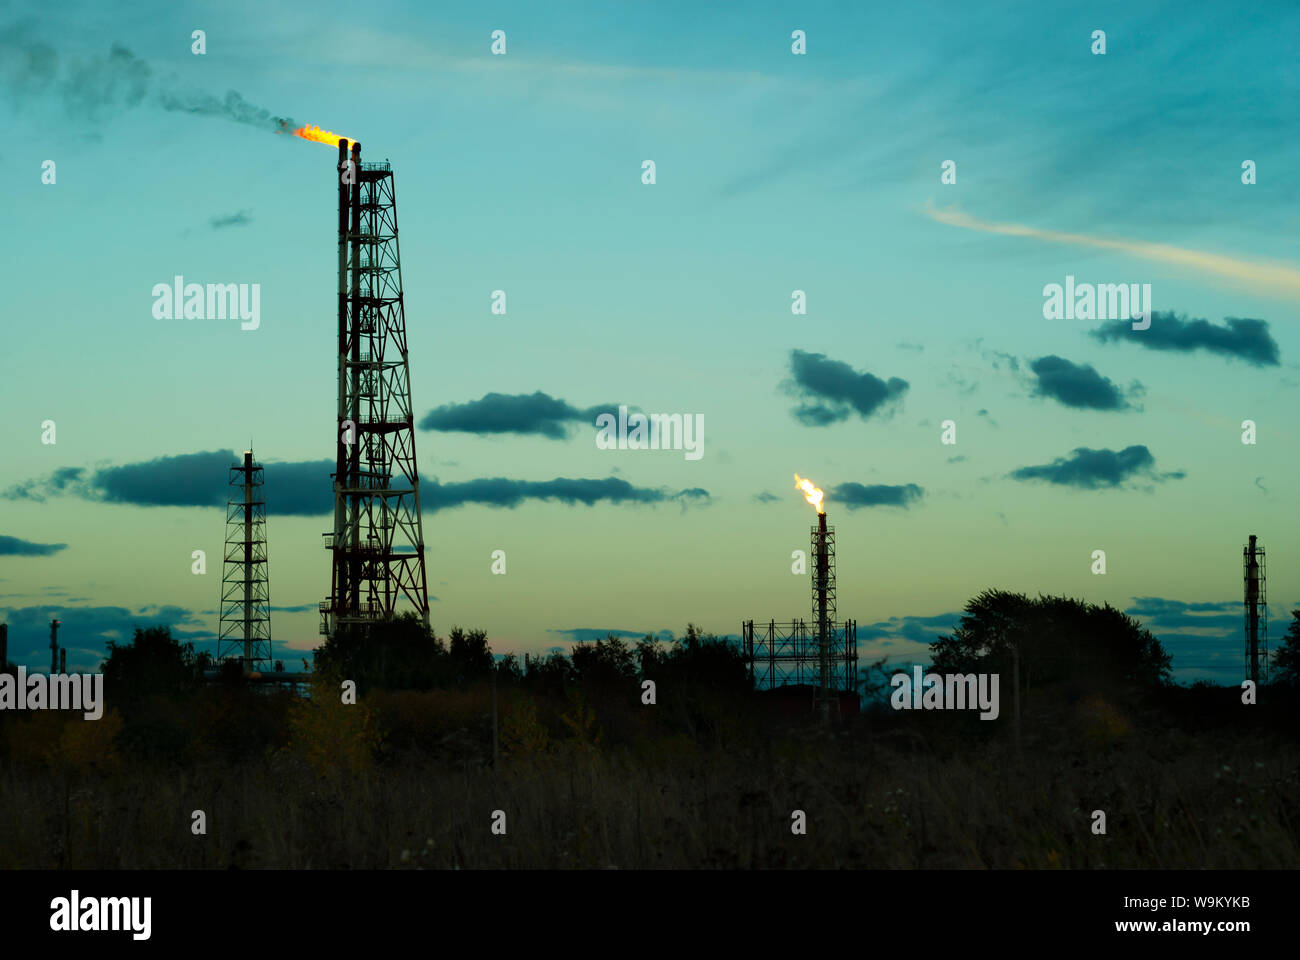 night silhouette industrial landscape - flares for flaring associated gas in an oil field Stock Photo